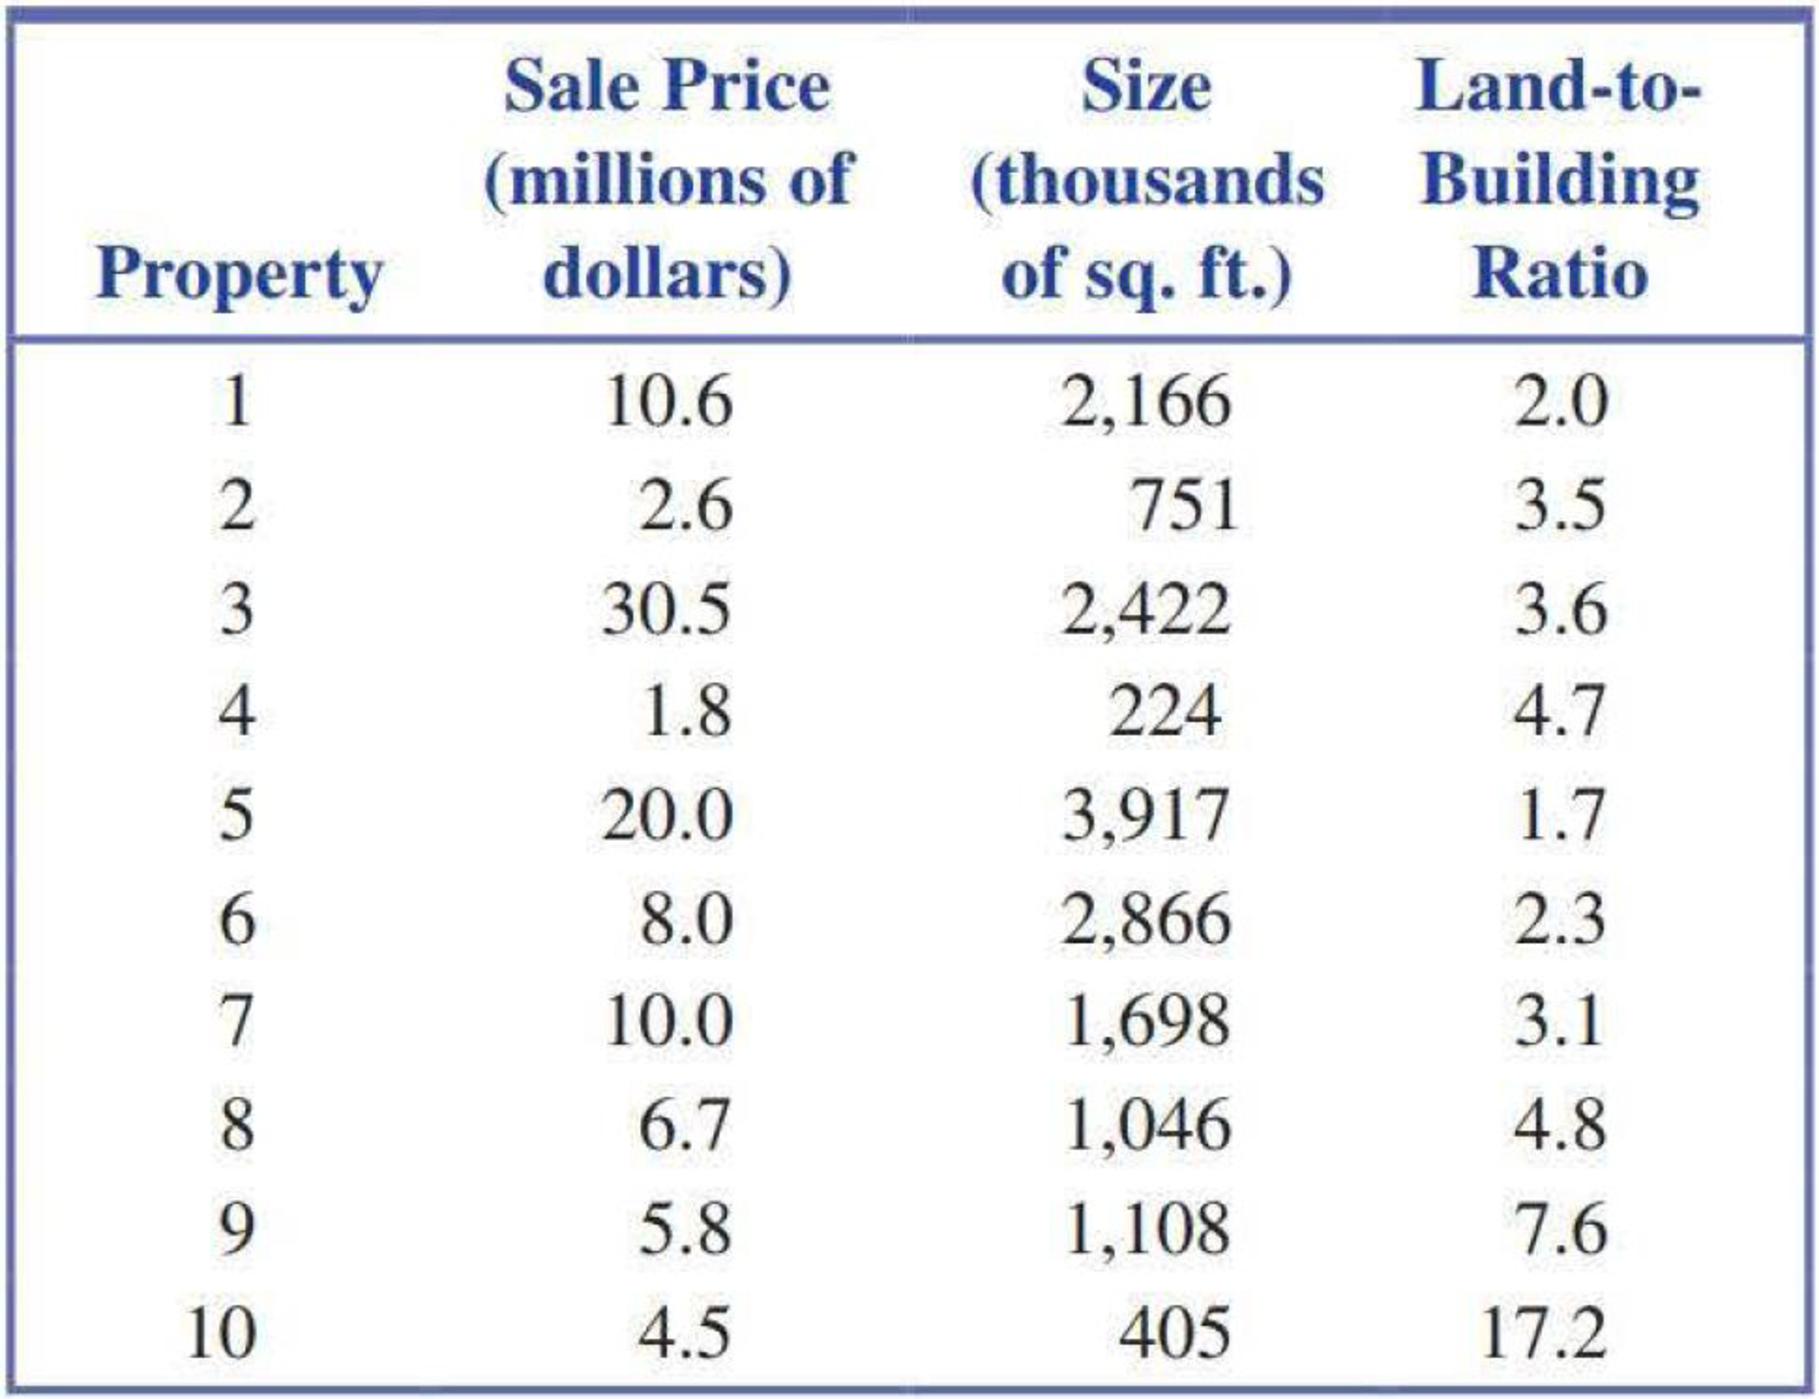 The following data on sale price, size, and land-to ...